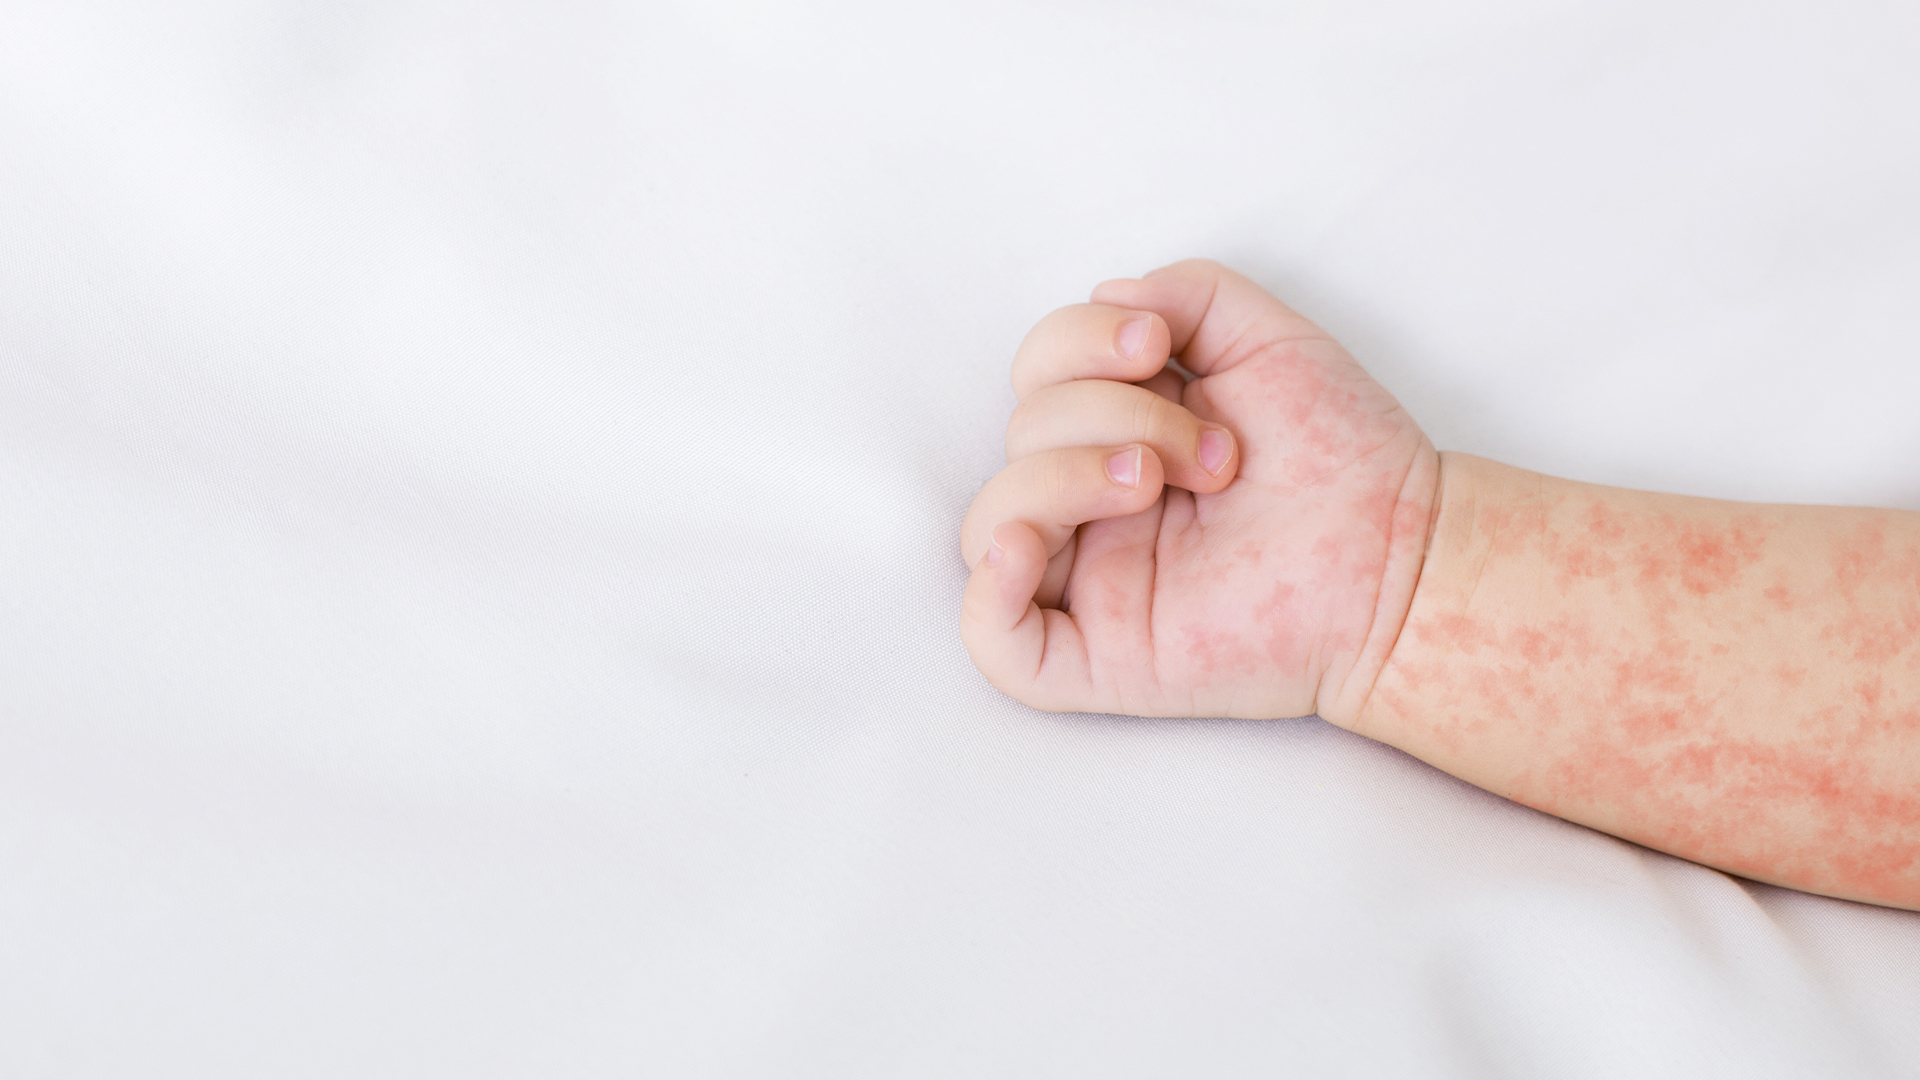 At least five cases of measles have been reported in Estrie